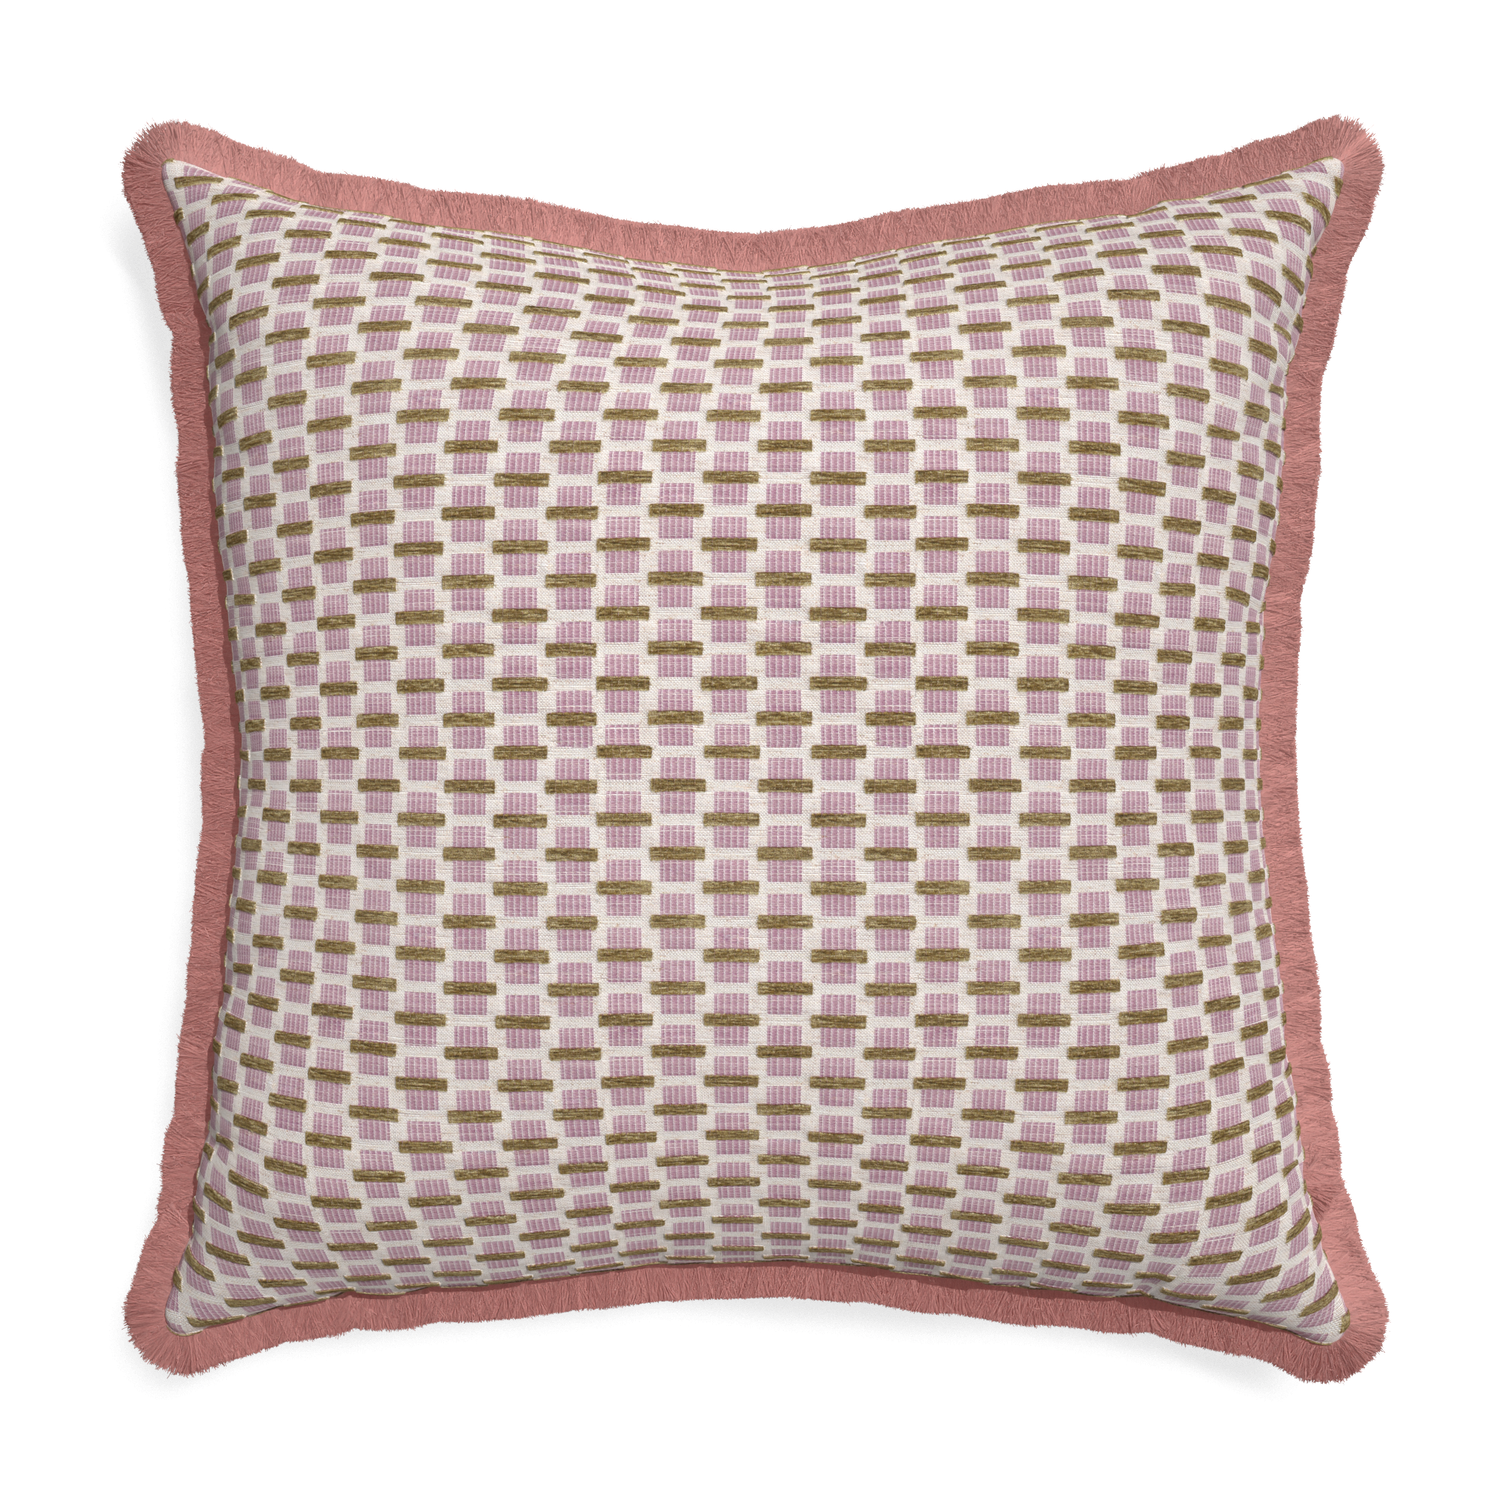 Euro-sham willow orchid custom pink geometric chenillepillow with d fringe on white background